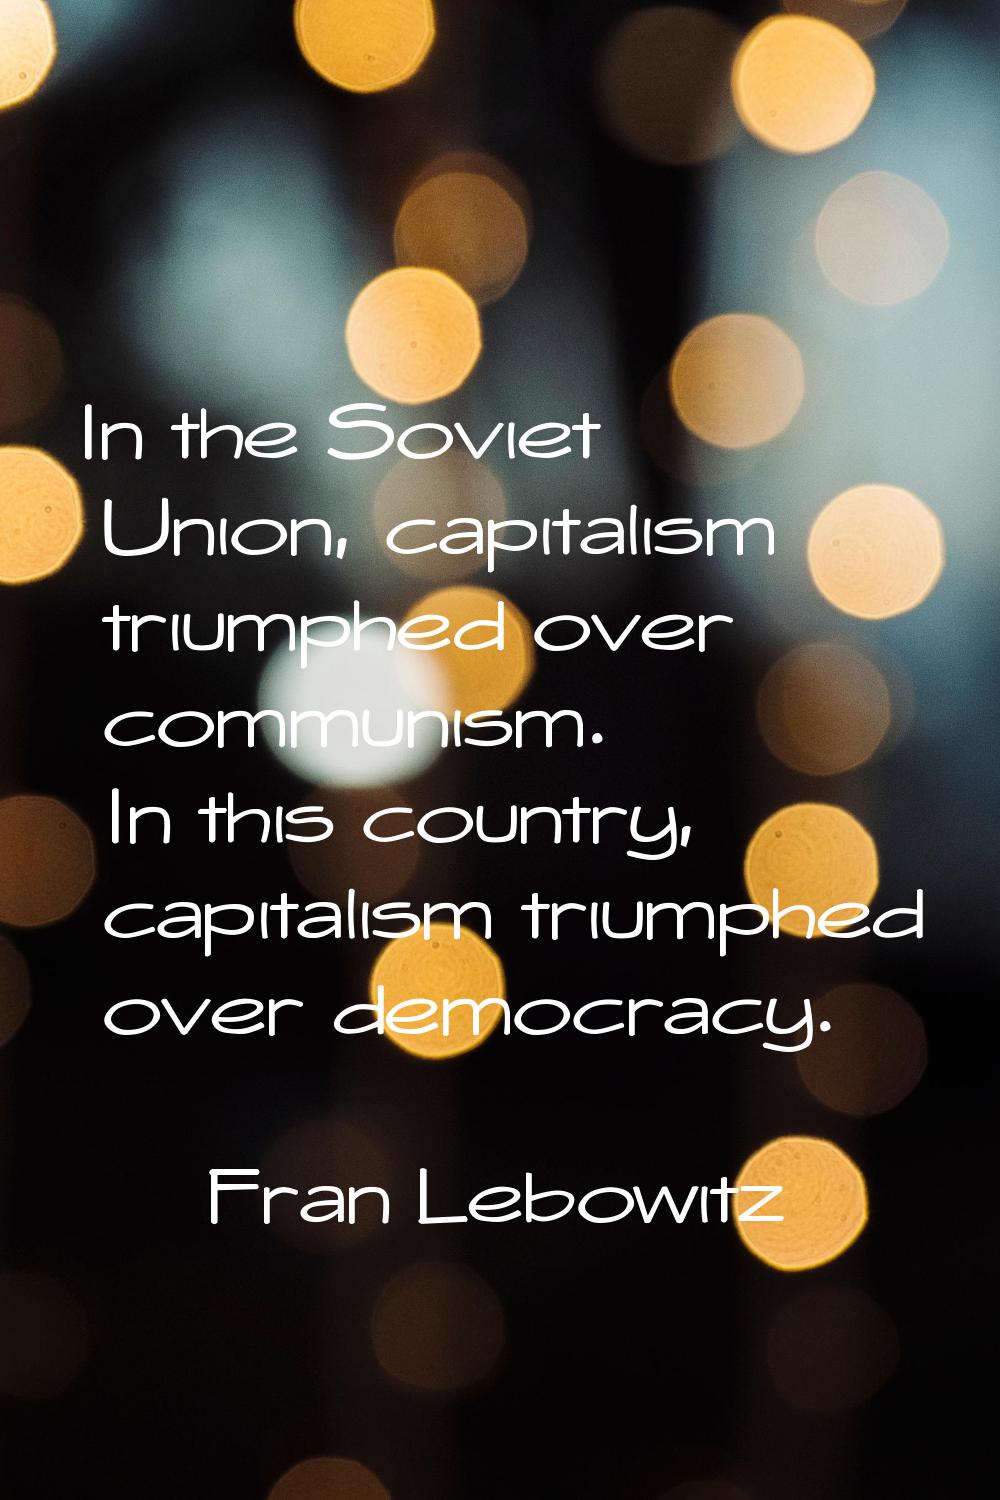 In the Soviet Union, capitalism triumphed over communism. In this country, capitalism triumphed ove